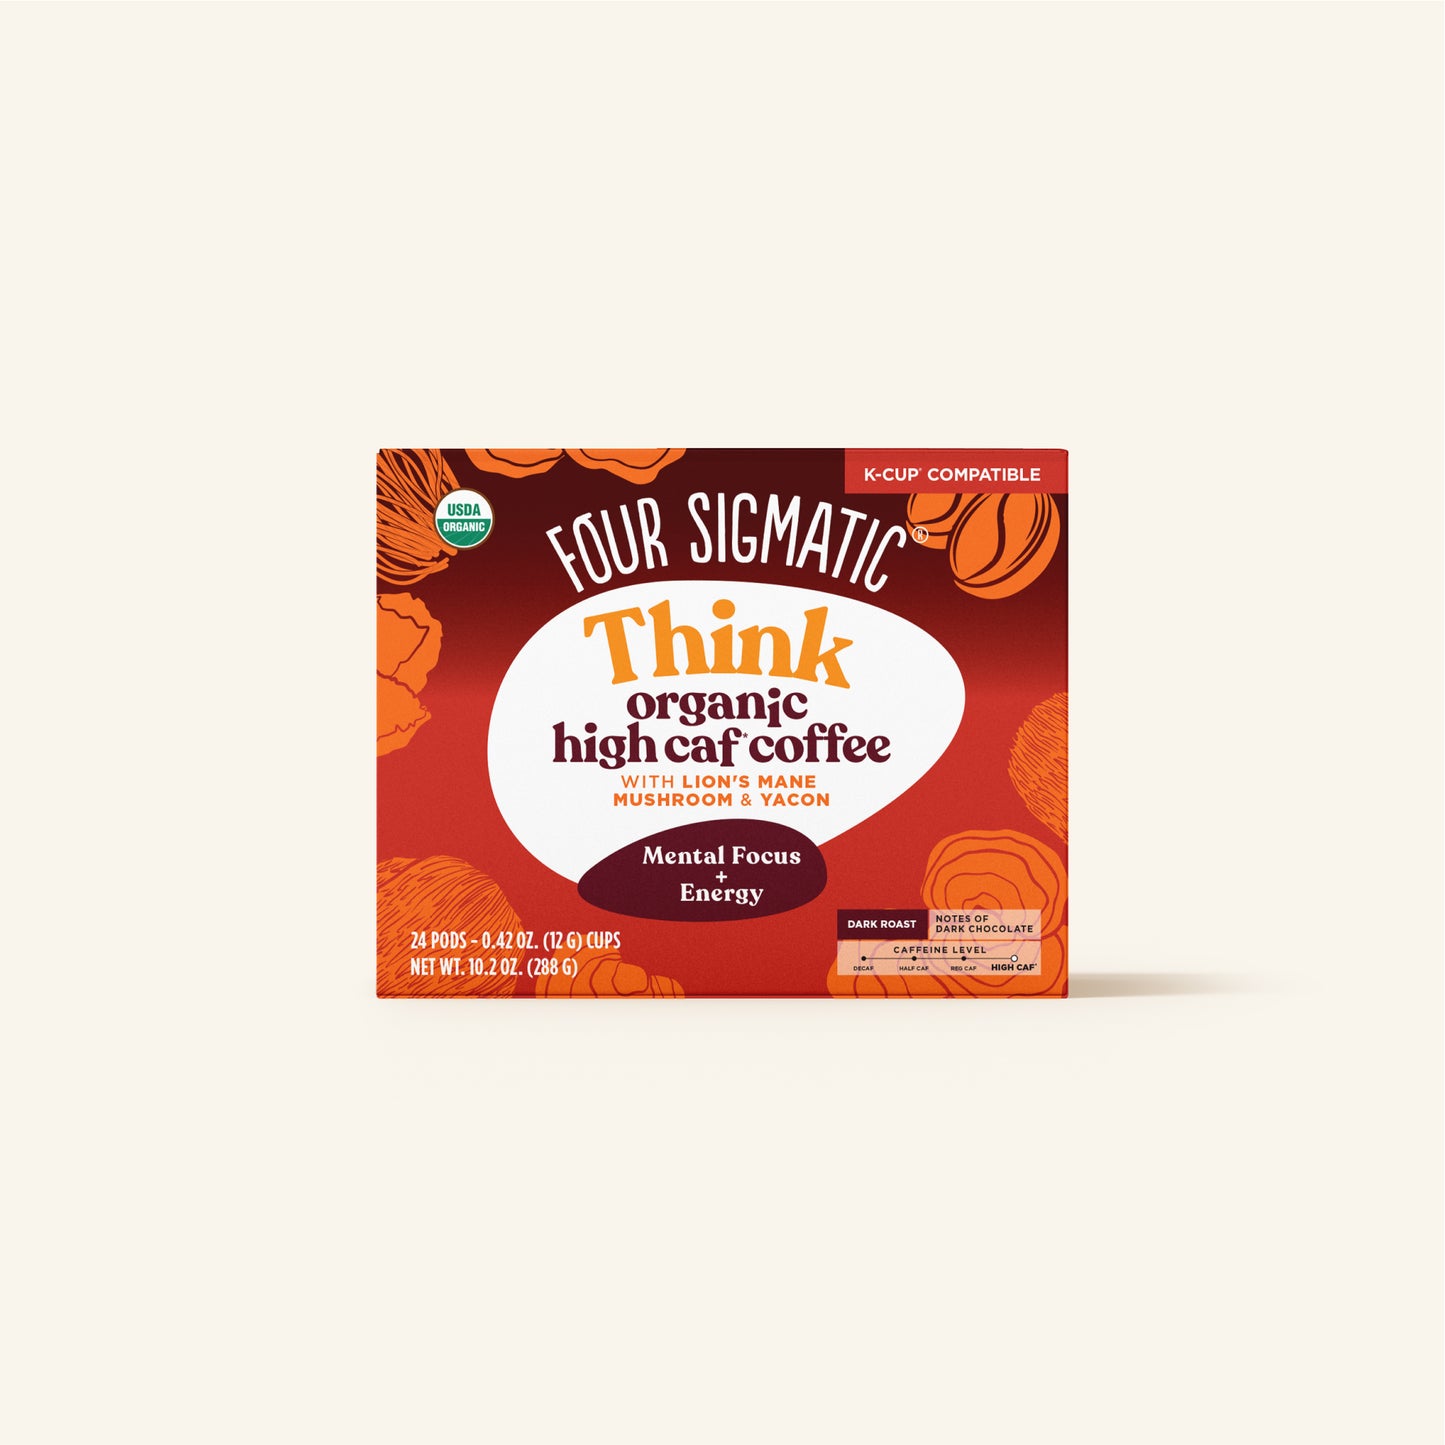 Think High Caf Coffee Pods Box- 24 count